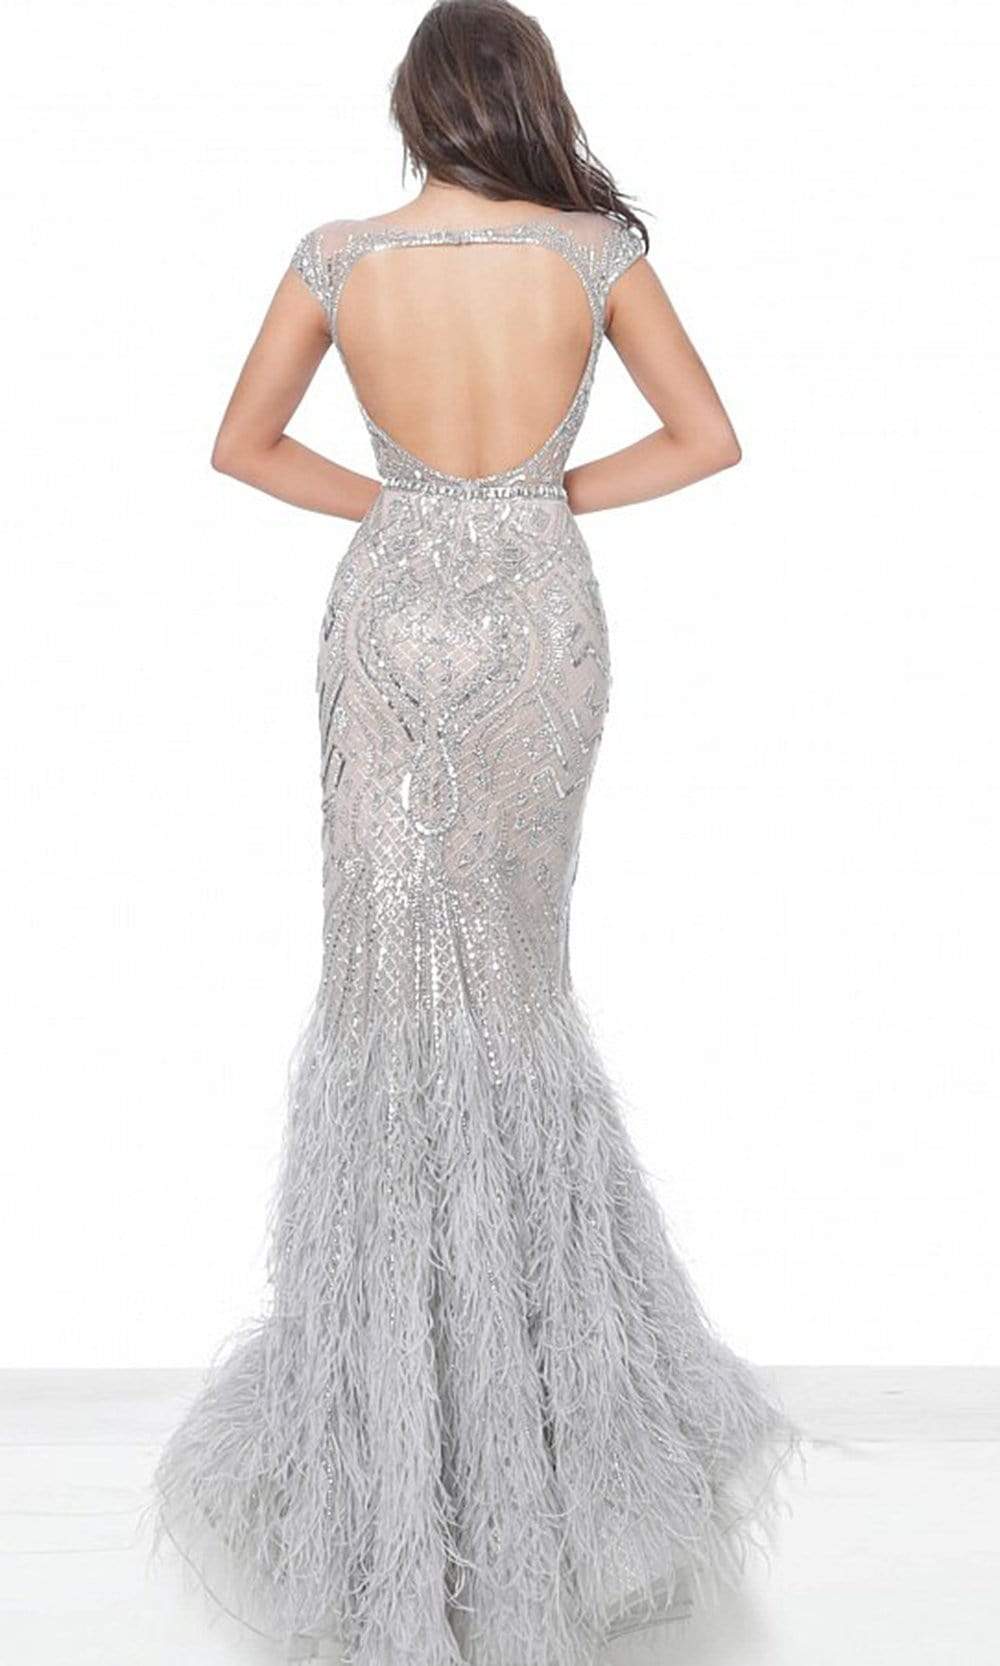 Jovani - 00880 Metallic Ornate Feather-Fringed Flare Gown Evening Dresses